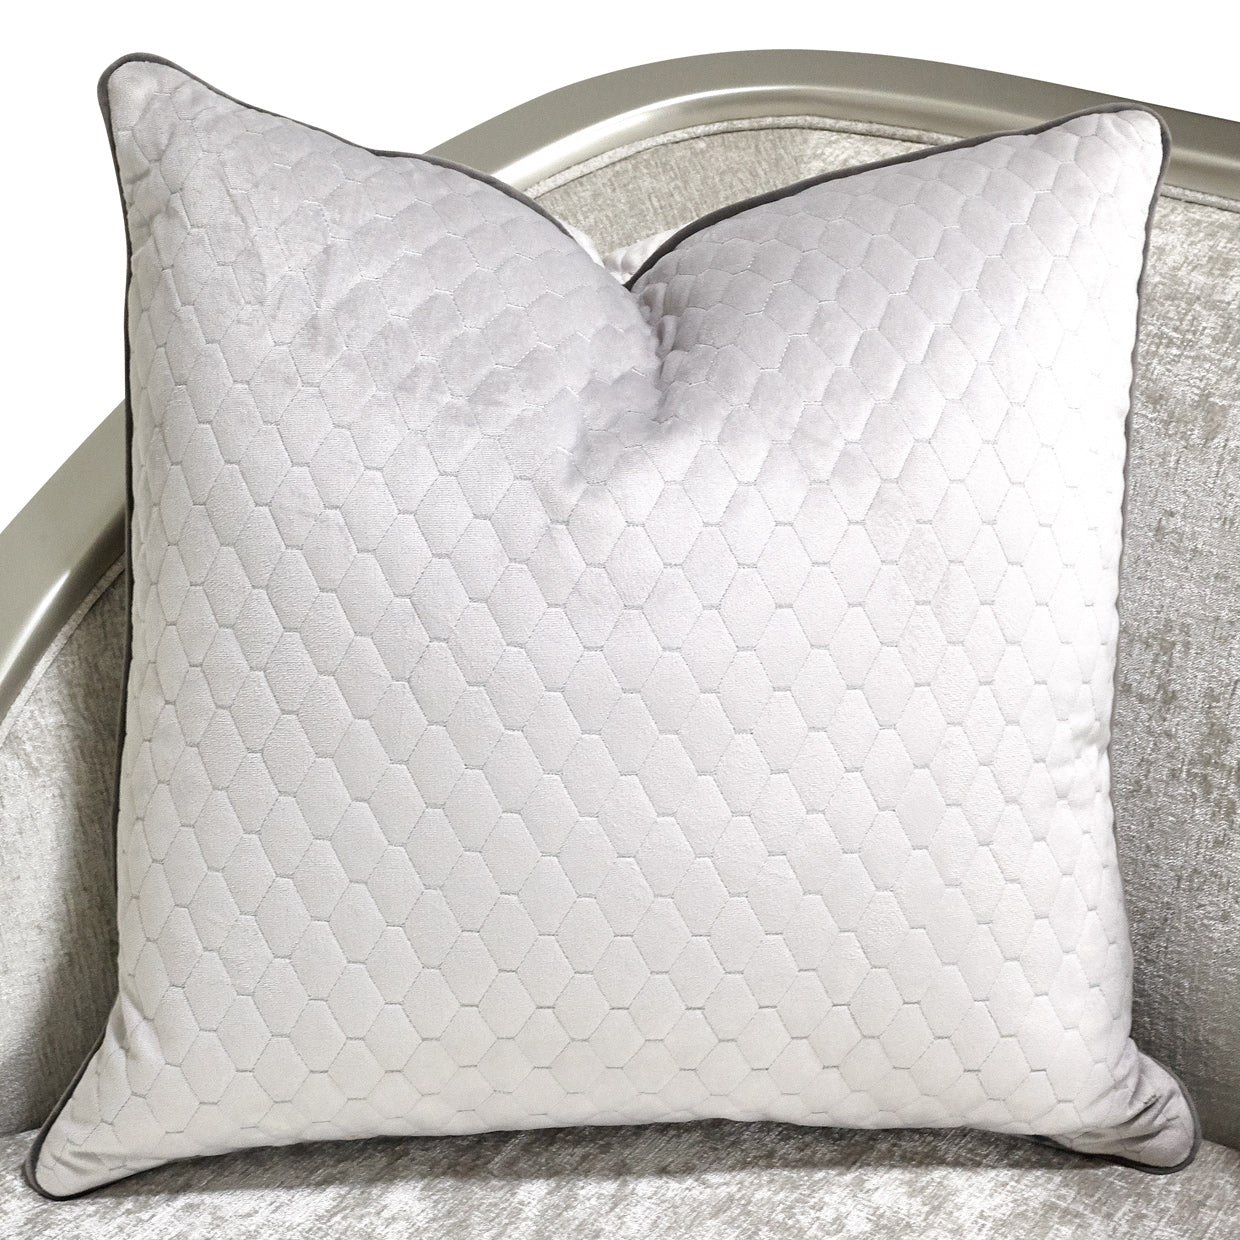 LANNA, Mansion ,Sofa ,Storm ,Silver Mist, Chenille upholstery, Quilted velvet, Honeycomb pattern, Platinum finish,Accent pillows, dream art, michael amini 